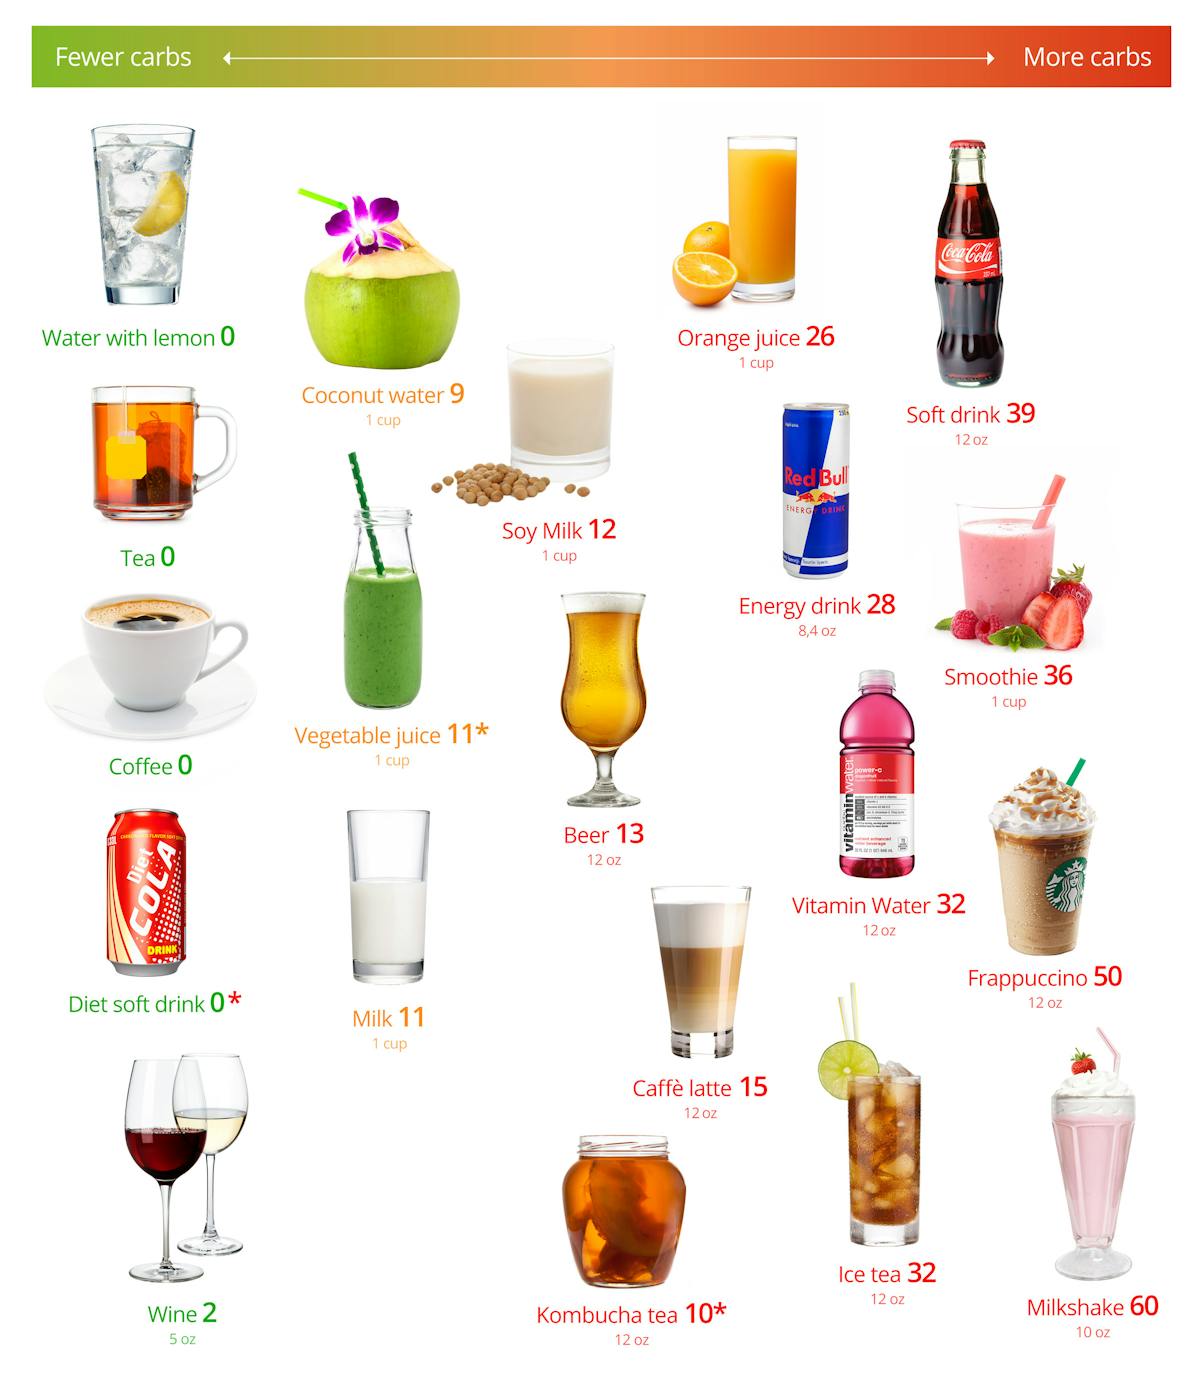 Low-carb drinks